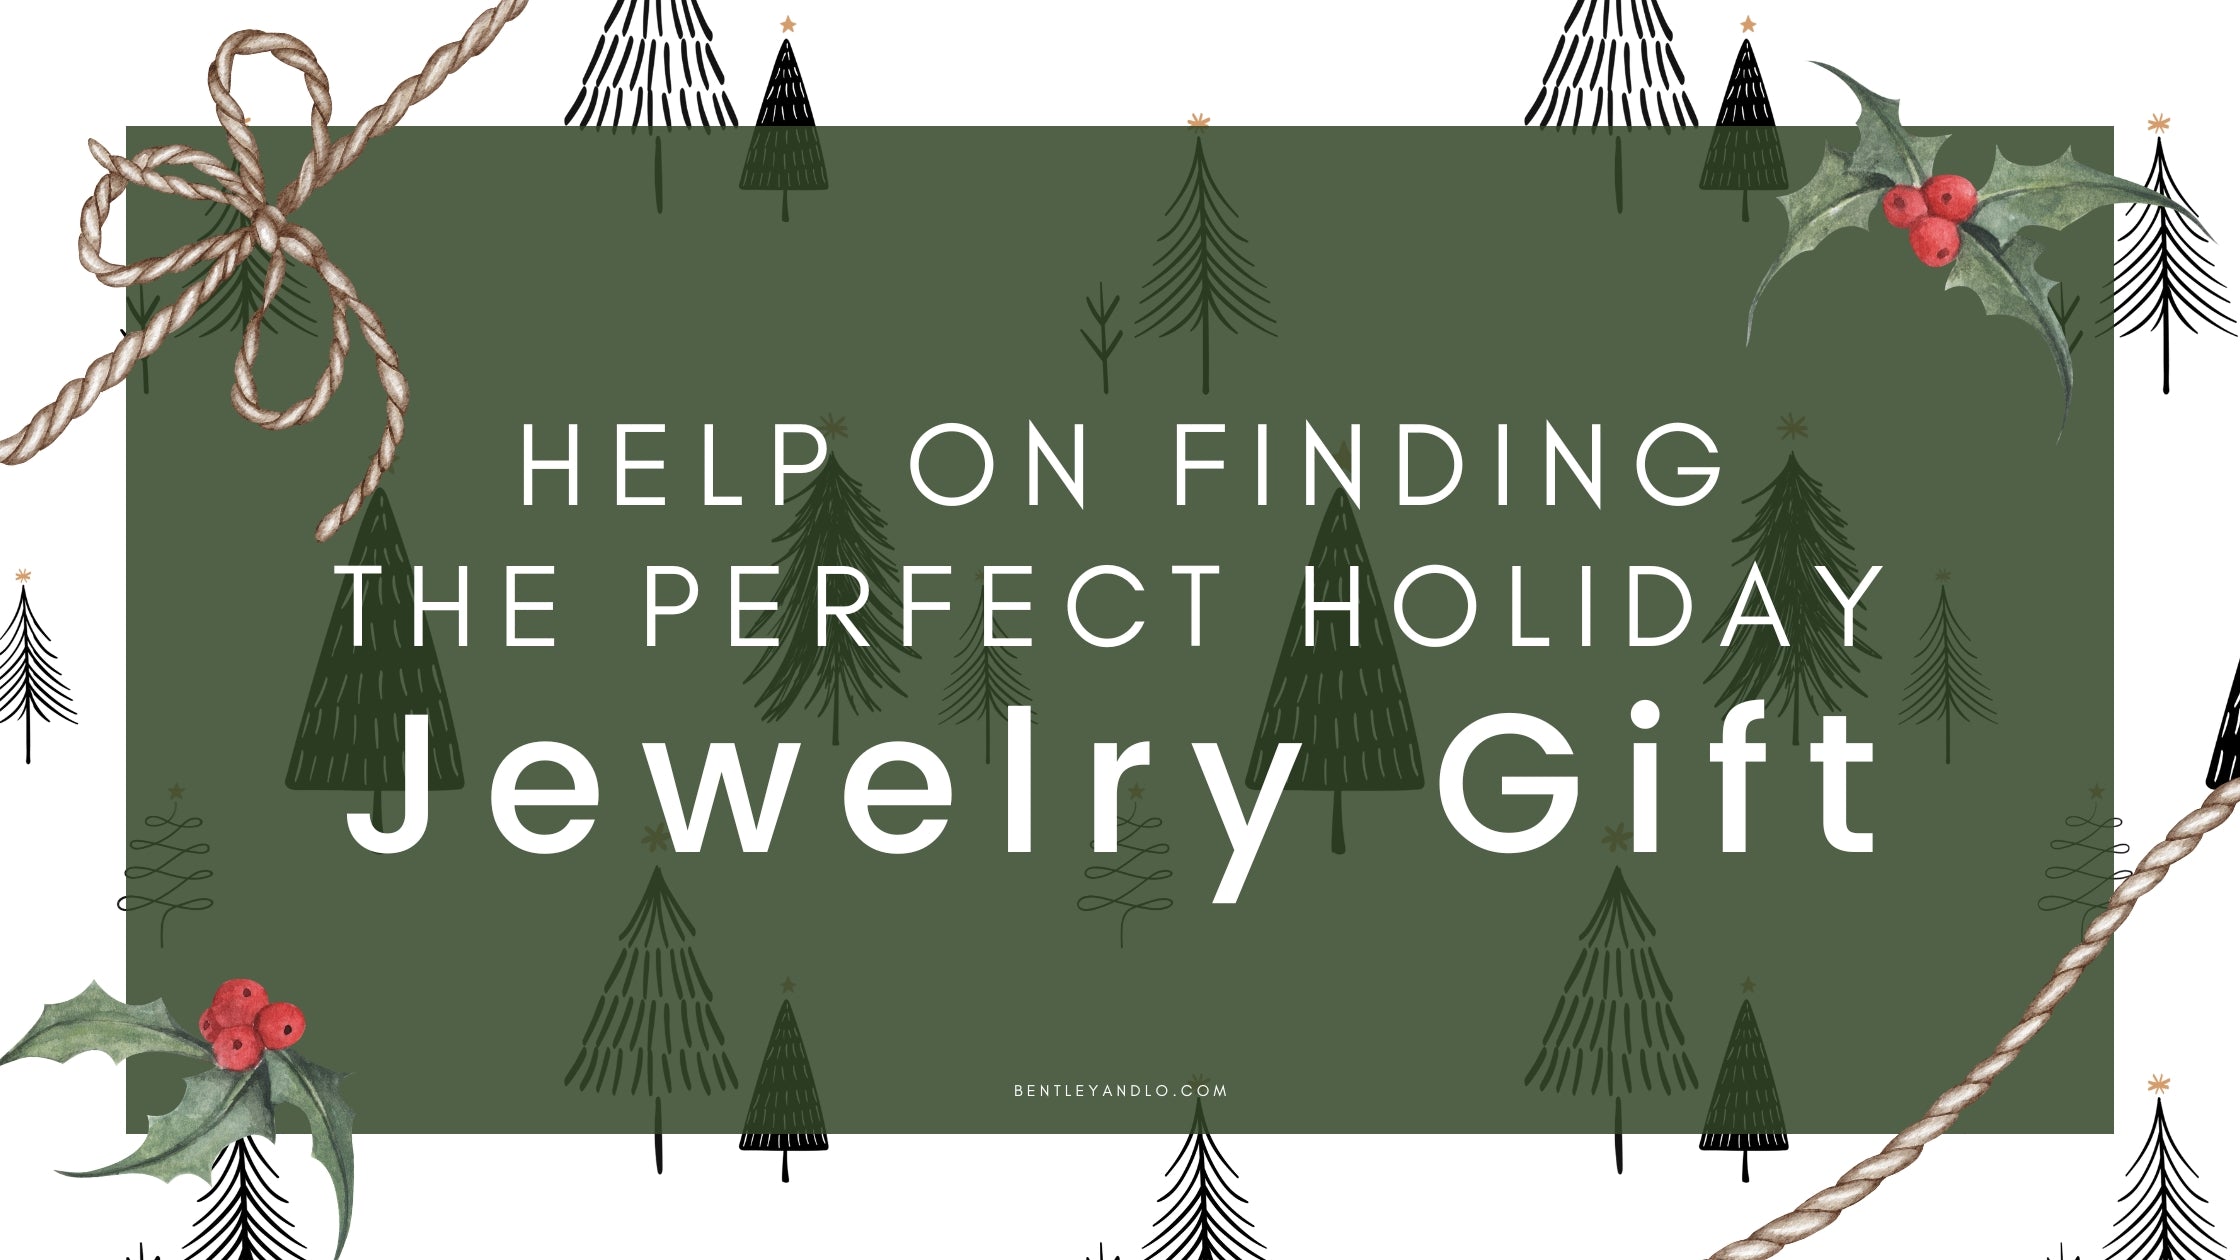 Help on Finding the Perfect Holiday Jewelry Gift